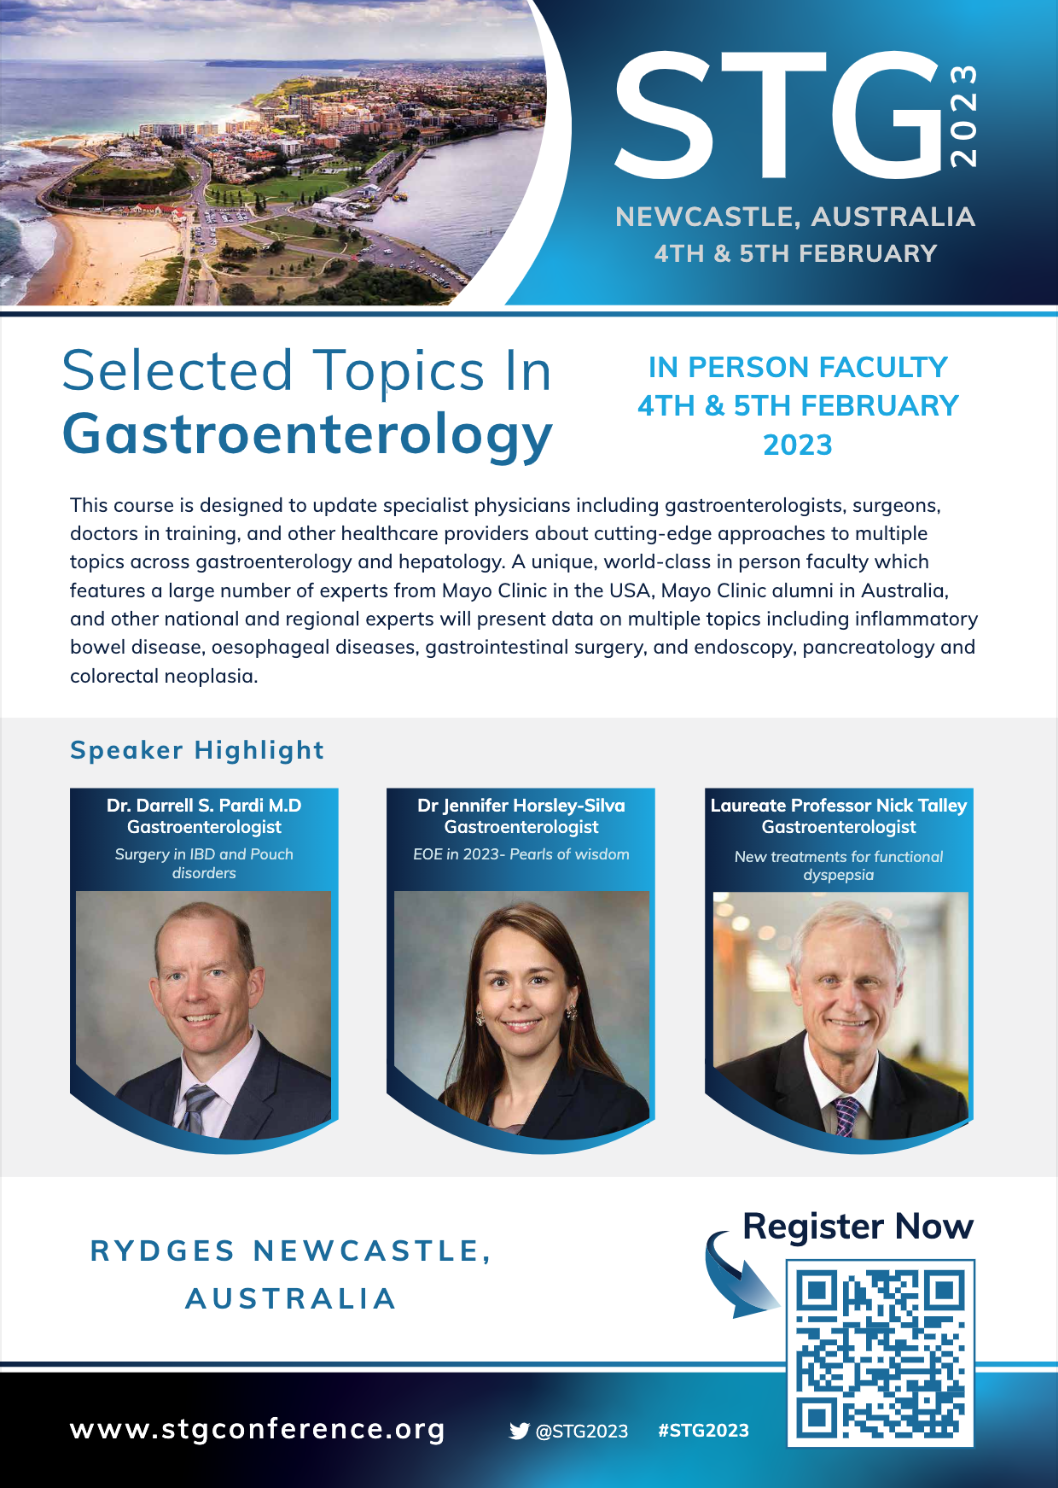 Selected Topics in Gastroenterology Conference (STG) 2023 Centre of